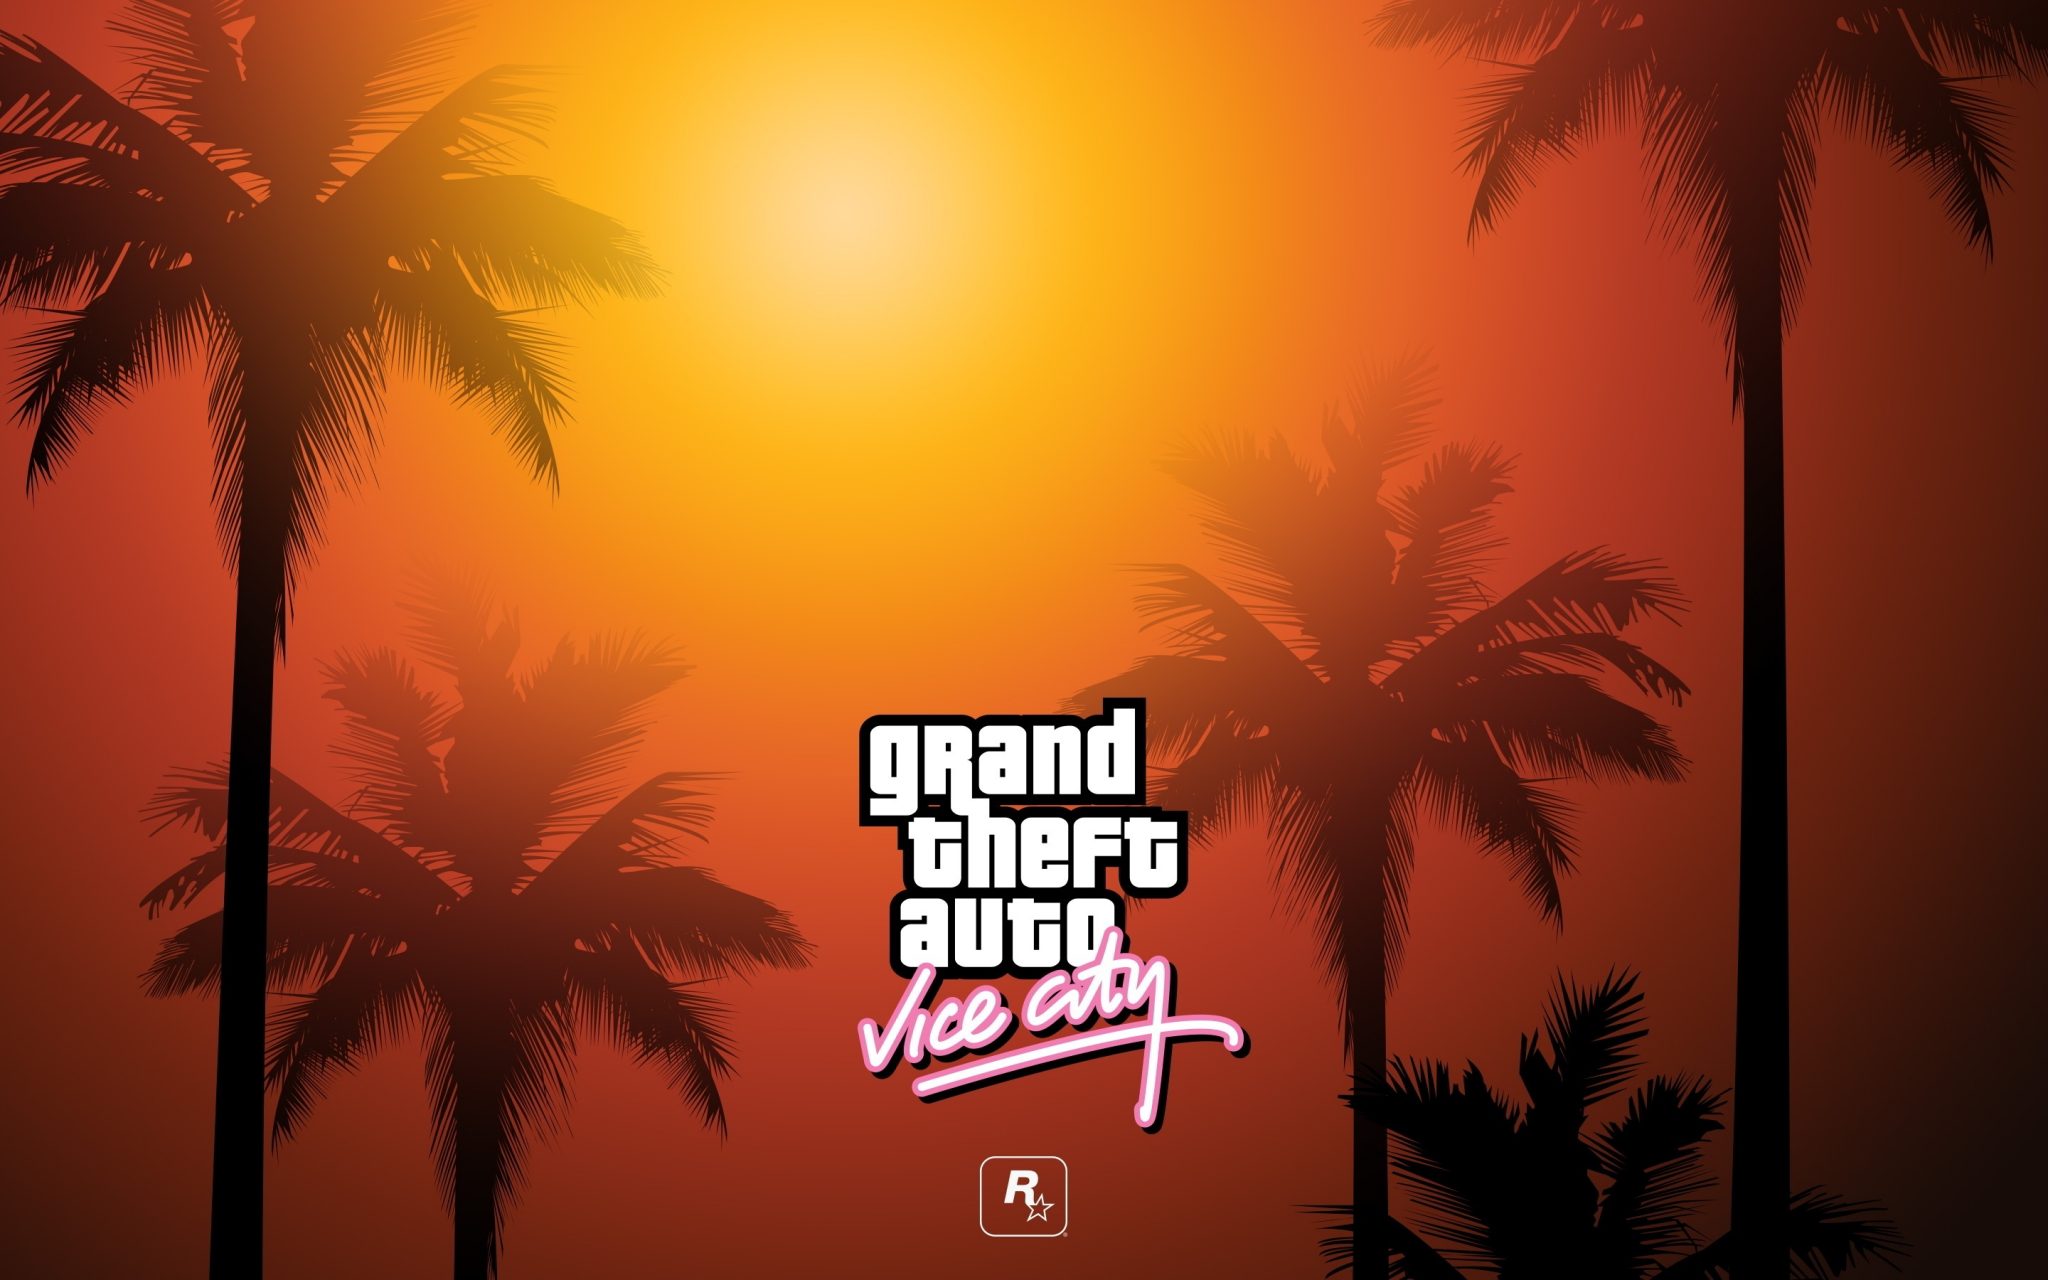 grand theft auto vice city gta - GTA 6 to go back to Vice City and will be released in 2022